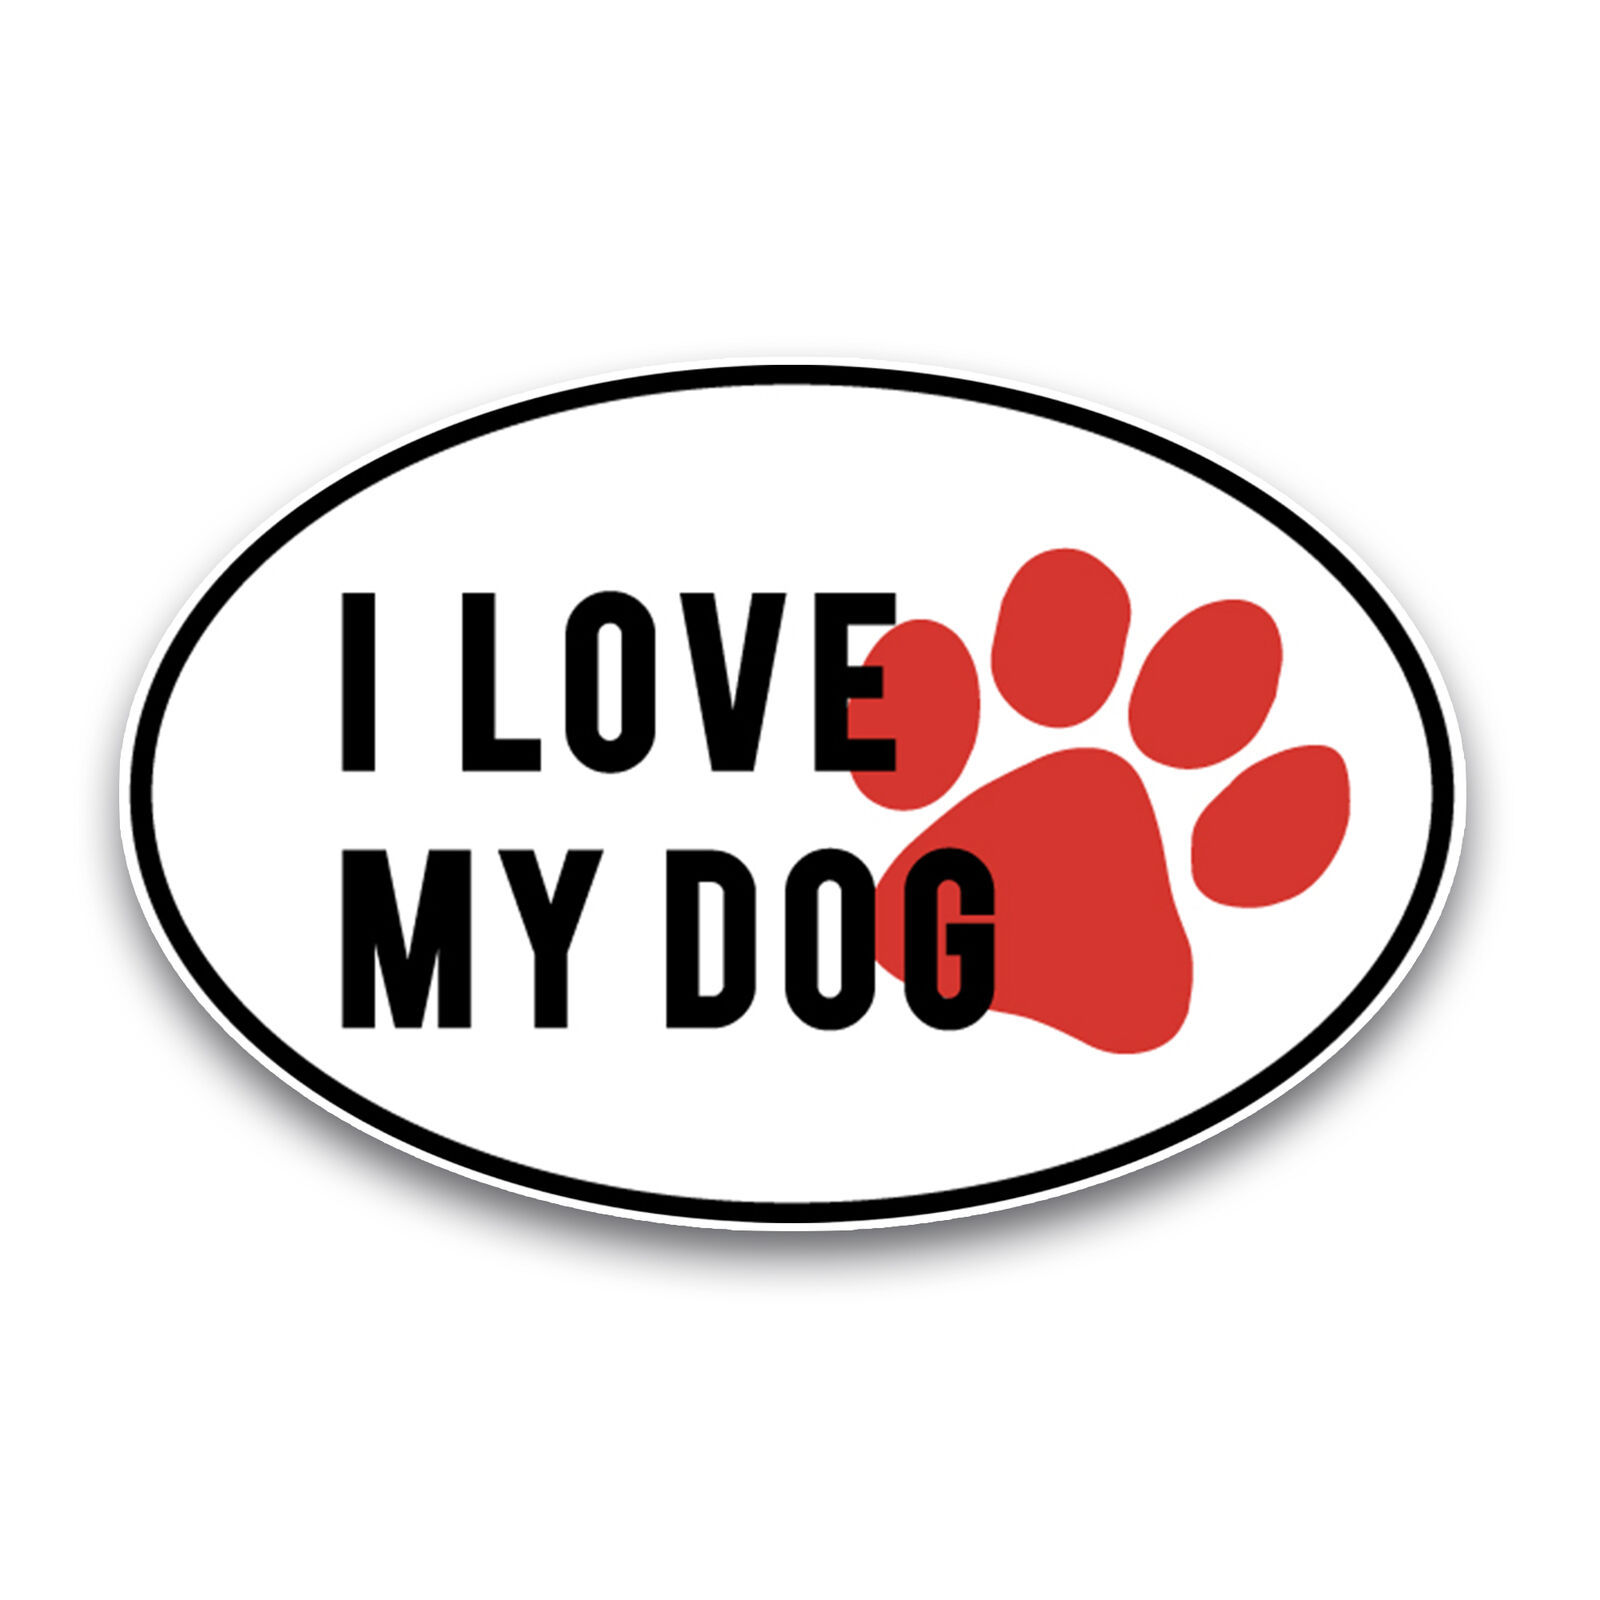 I Love My Dog Black and White with Red Paw Print Oval Magnet Decal, 4x6 Inches